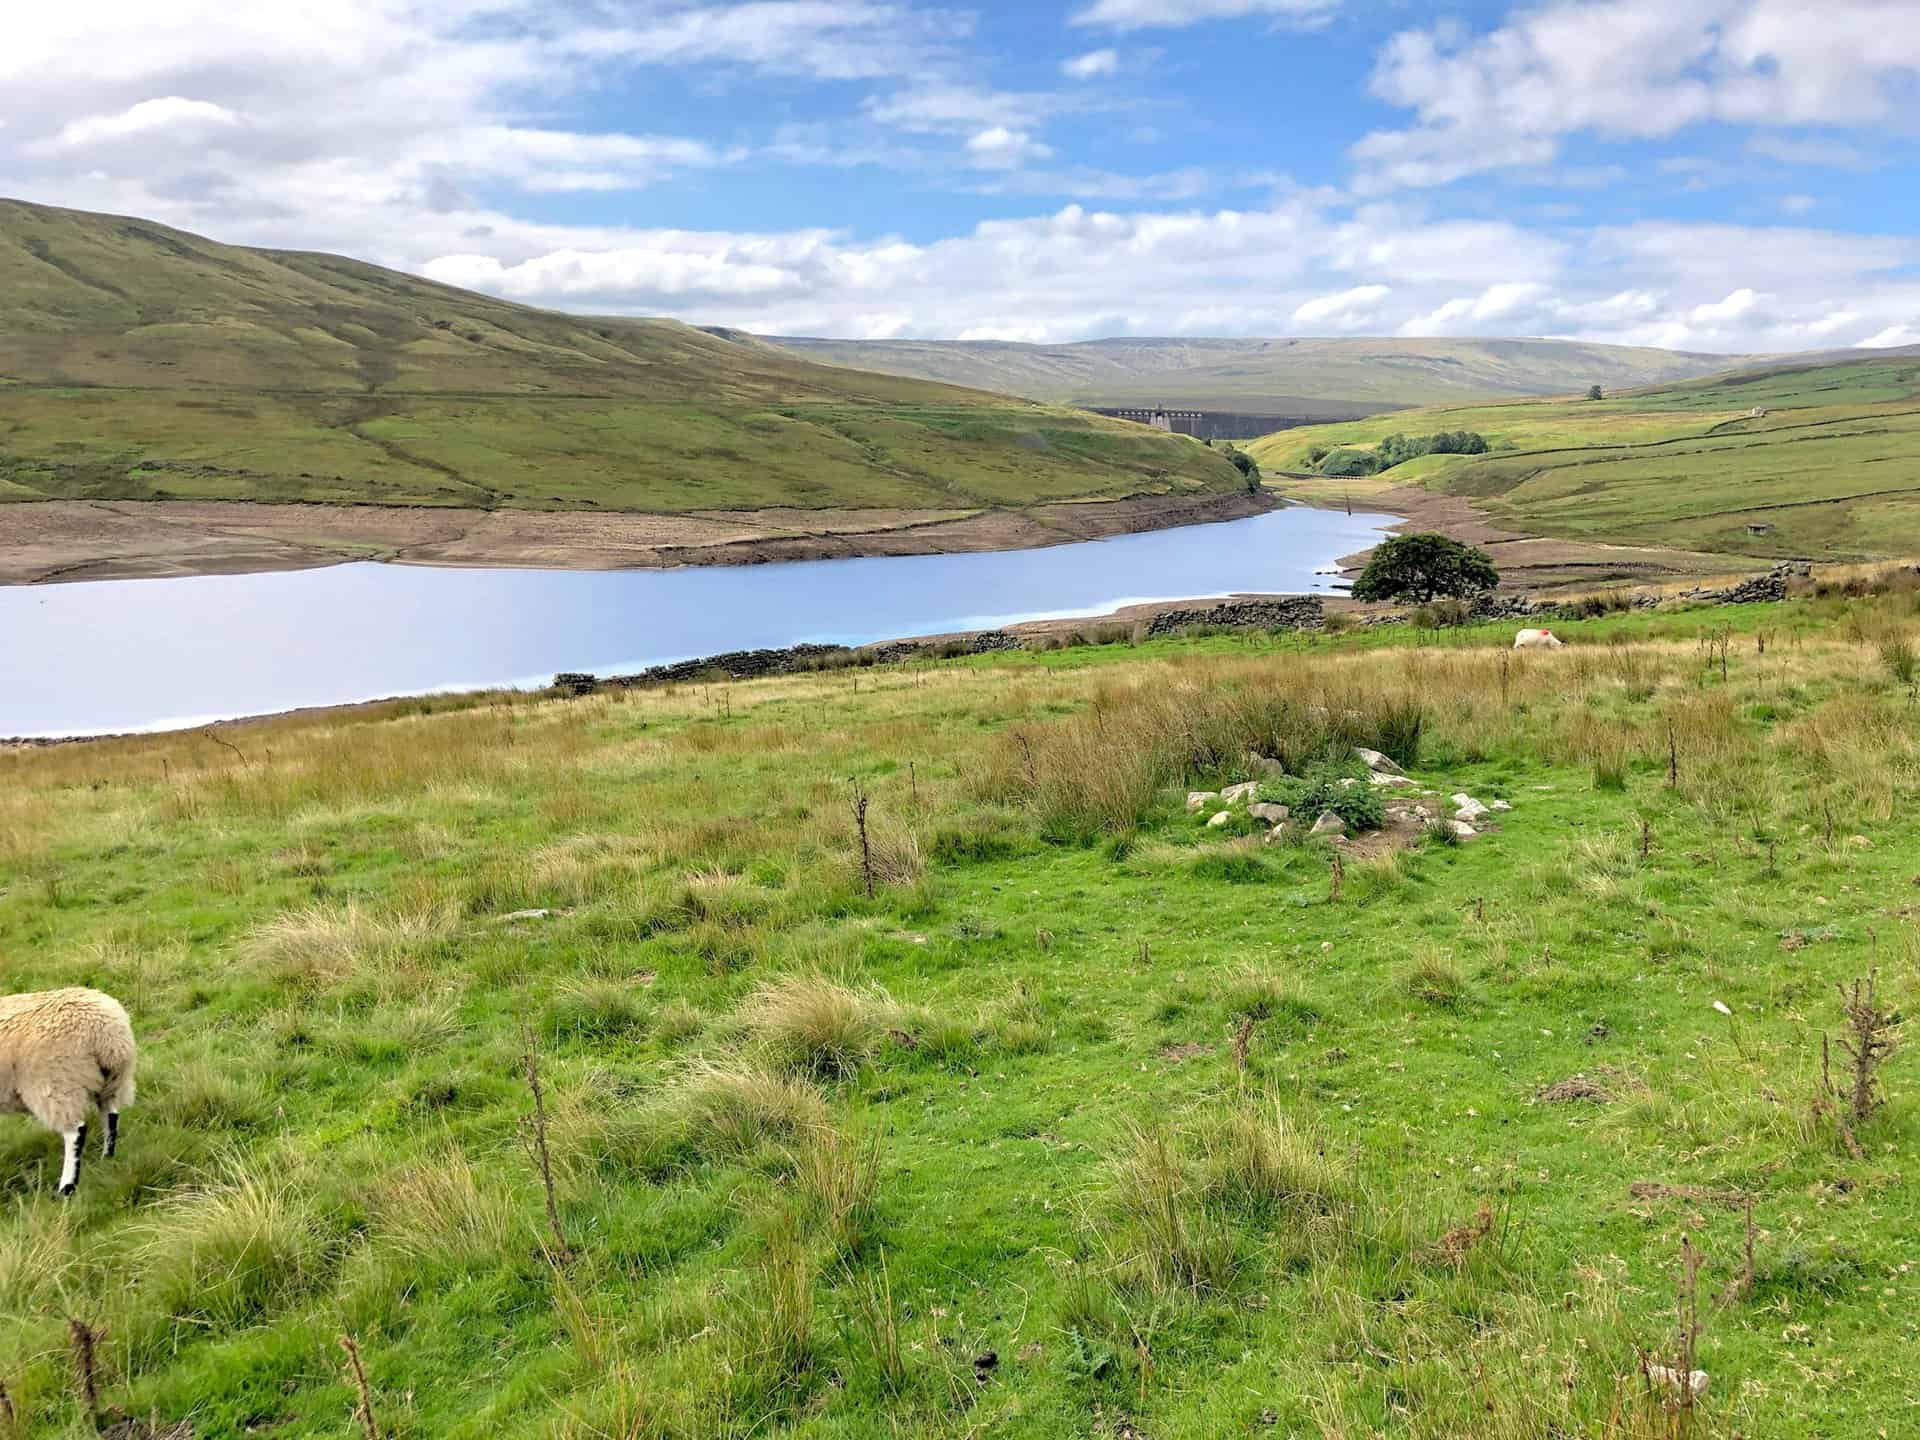 The western end of Scar House Reservoir, with Great Whernside in the background. The halfway point of this Nidderdale Way walk.